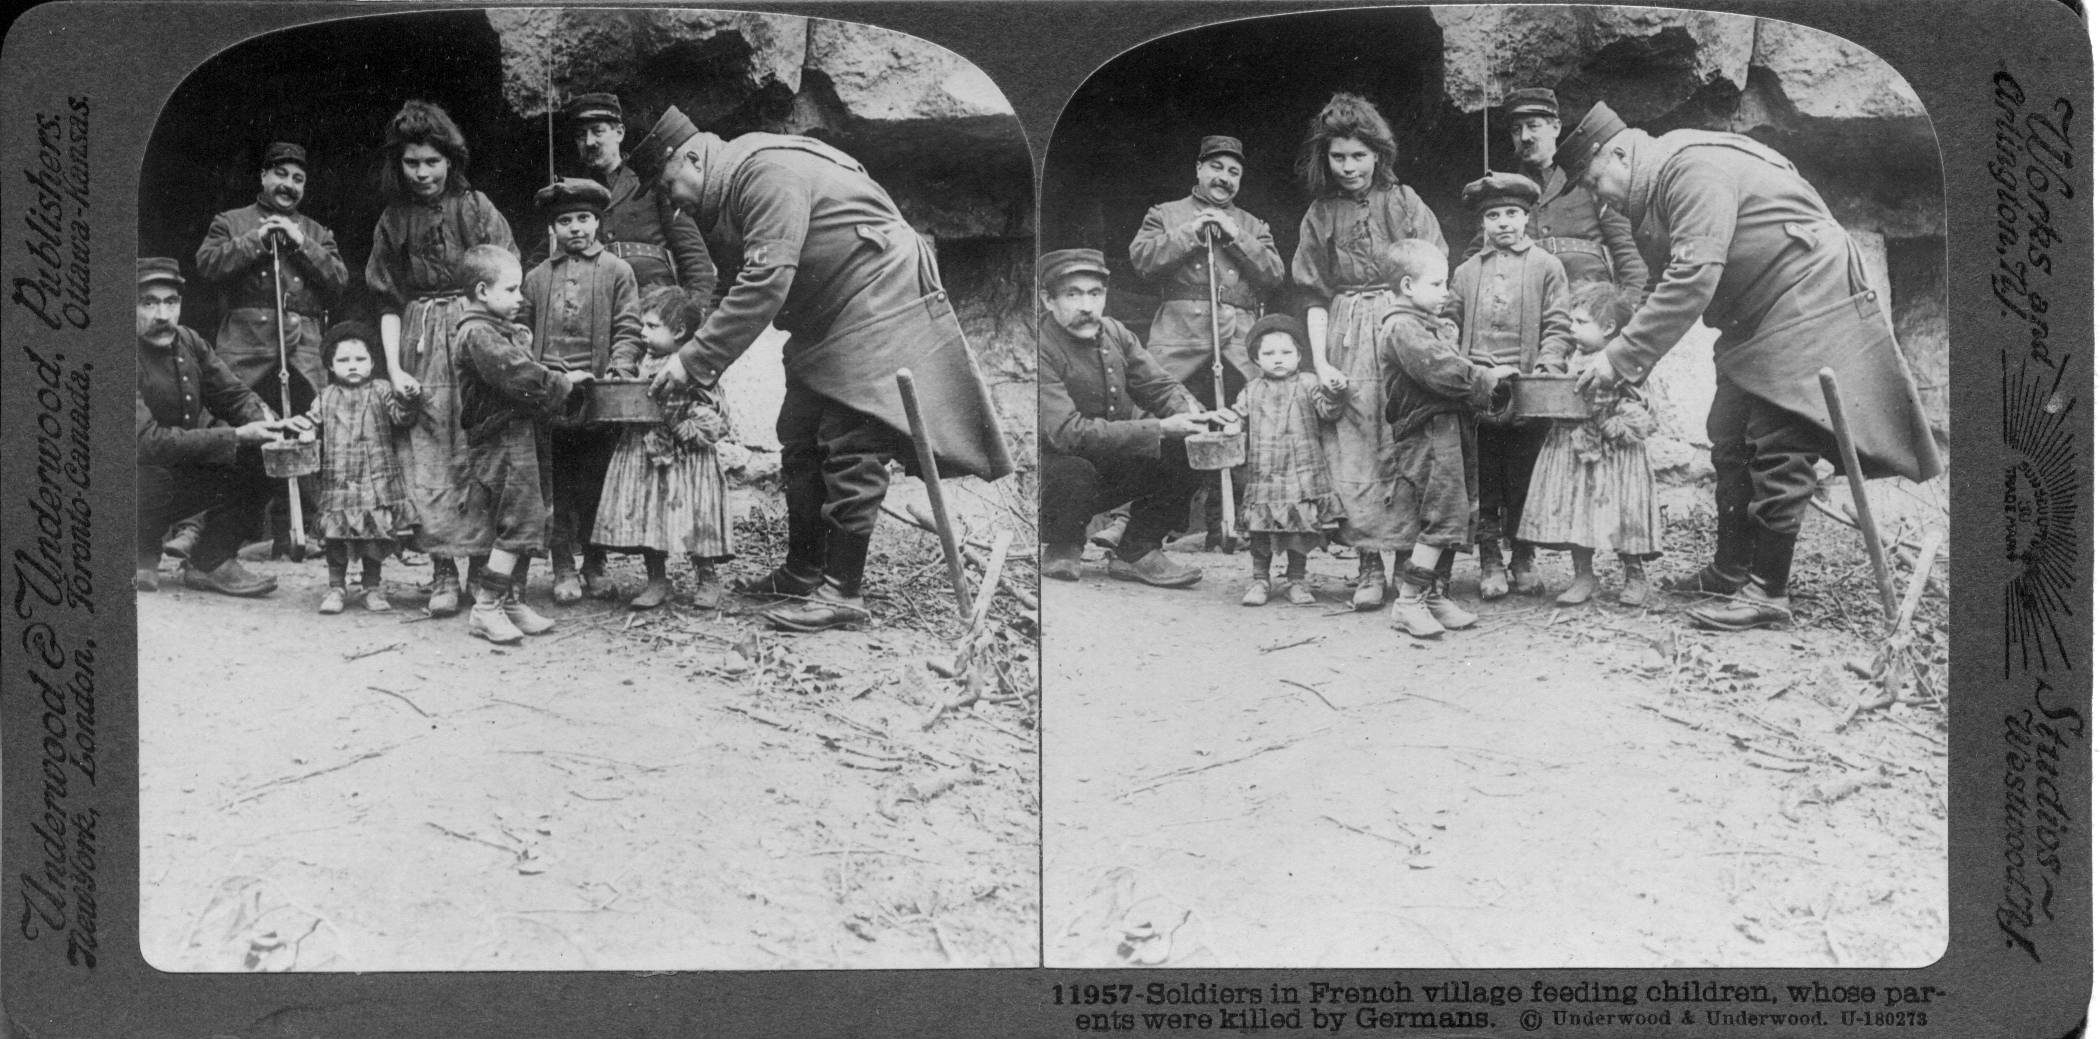 Soldiers in French village feeding children, whose parents were killed by Germans